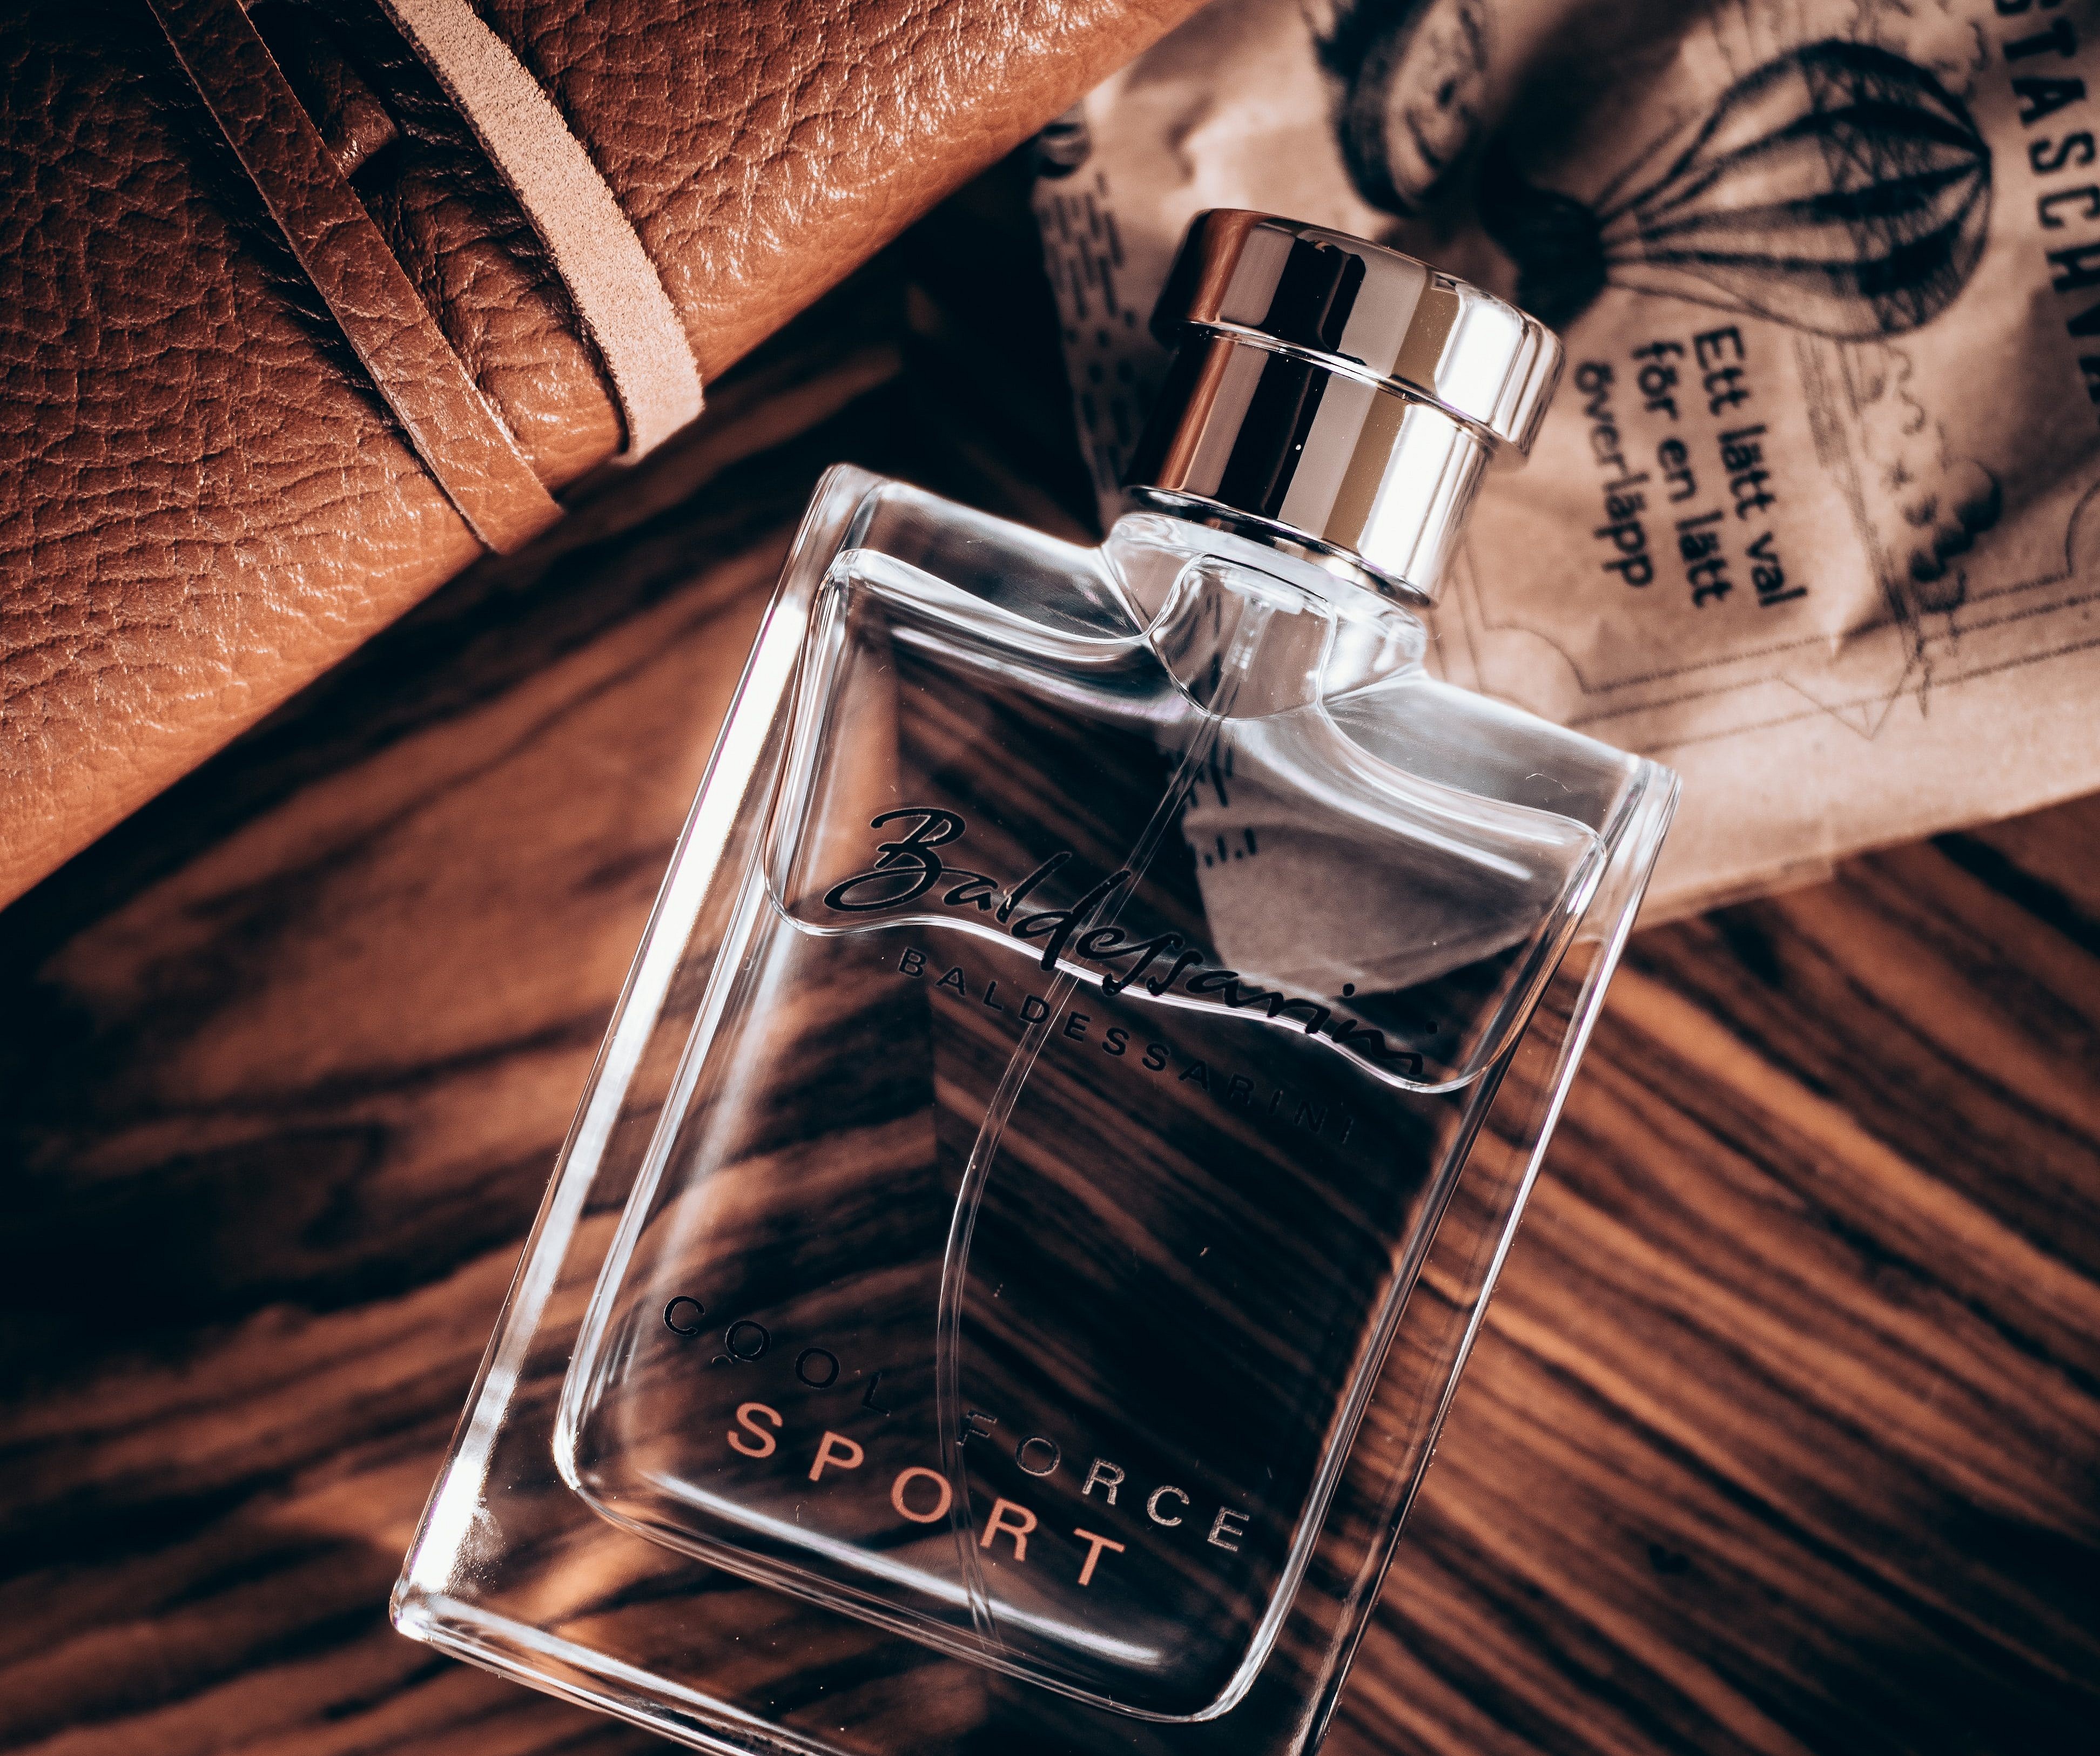 Heaven scent – Top 5 Leather Scents - Real Leather. Stay Different.Real  Leather. Stay Different.